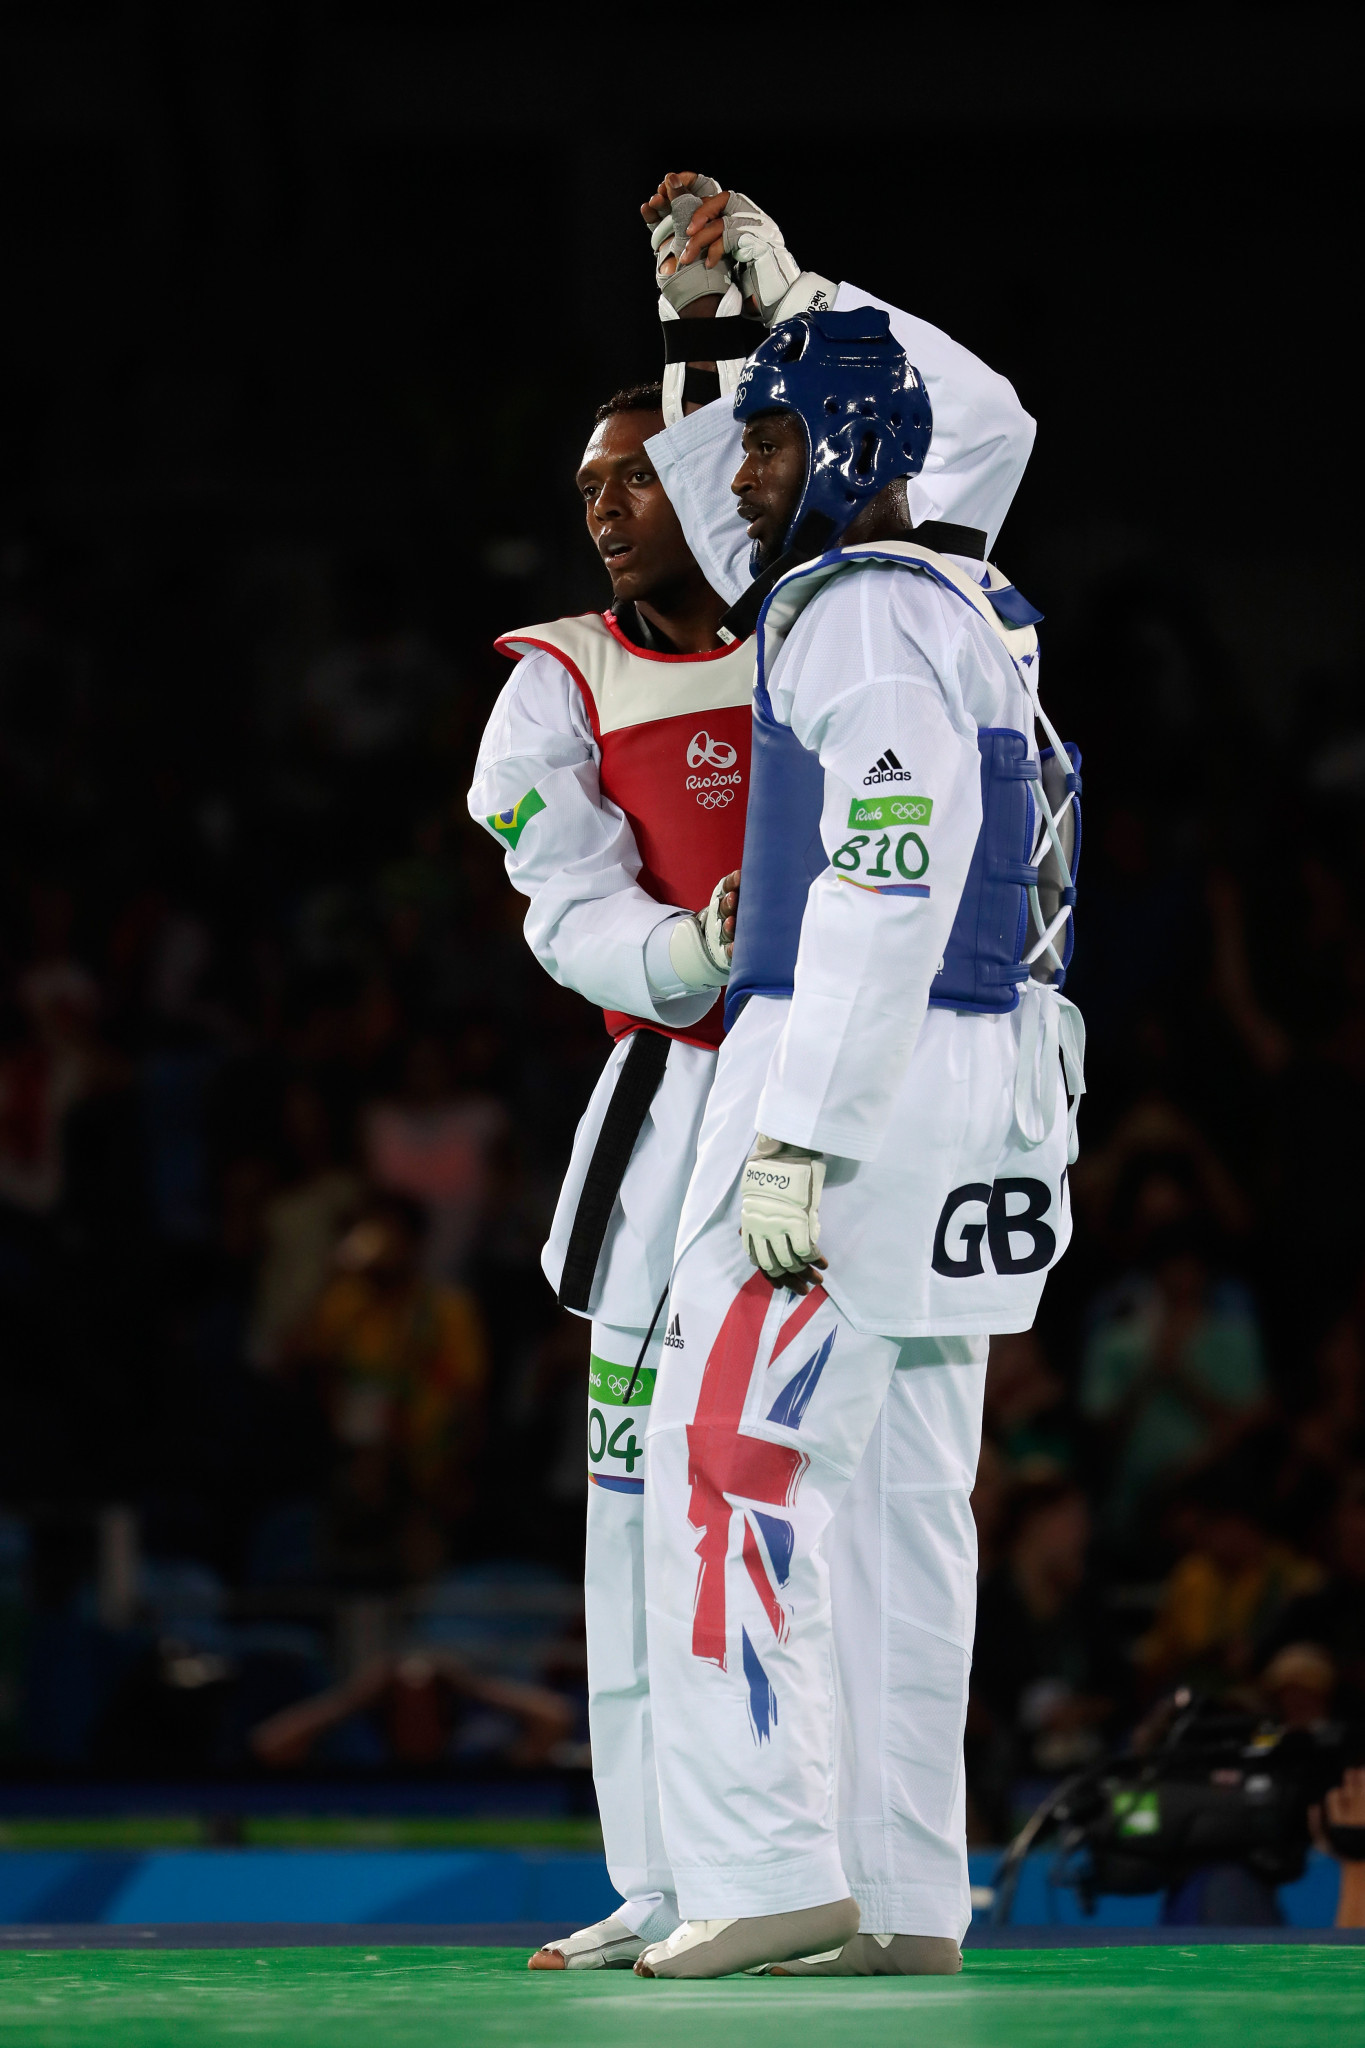 Mahama Cho, of Great Britain, seen here being consoled by Maicon Siqueira of Brazil after the Men's +80kg Bronze Medal contest in the Rio 2016 Olympic Games ©Getty Images